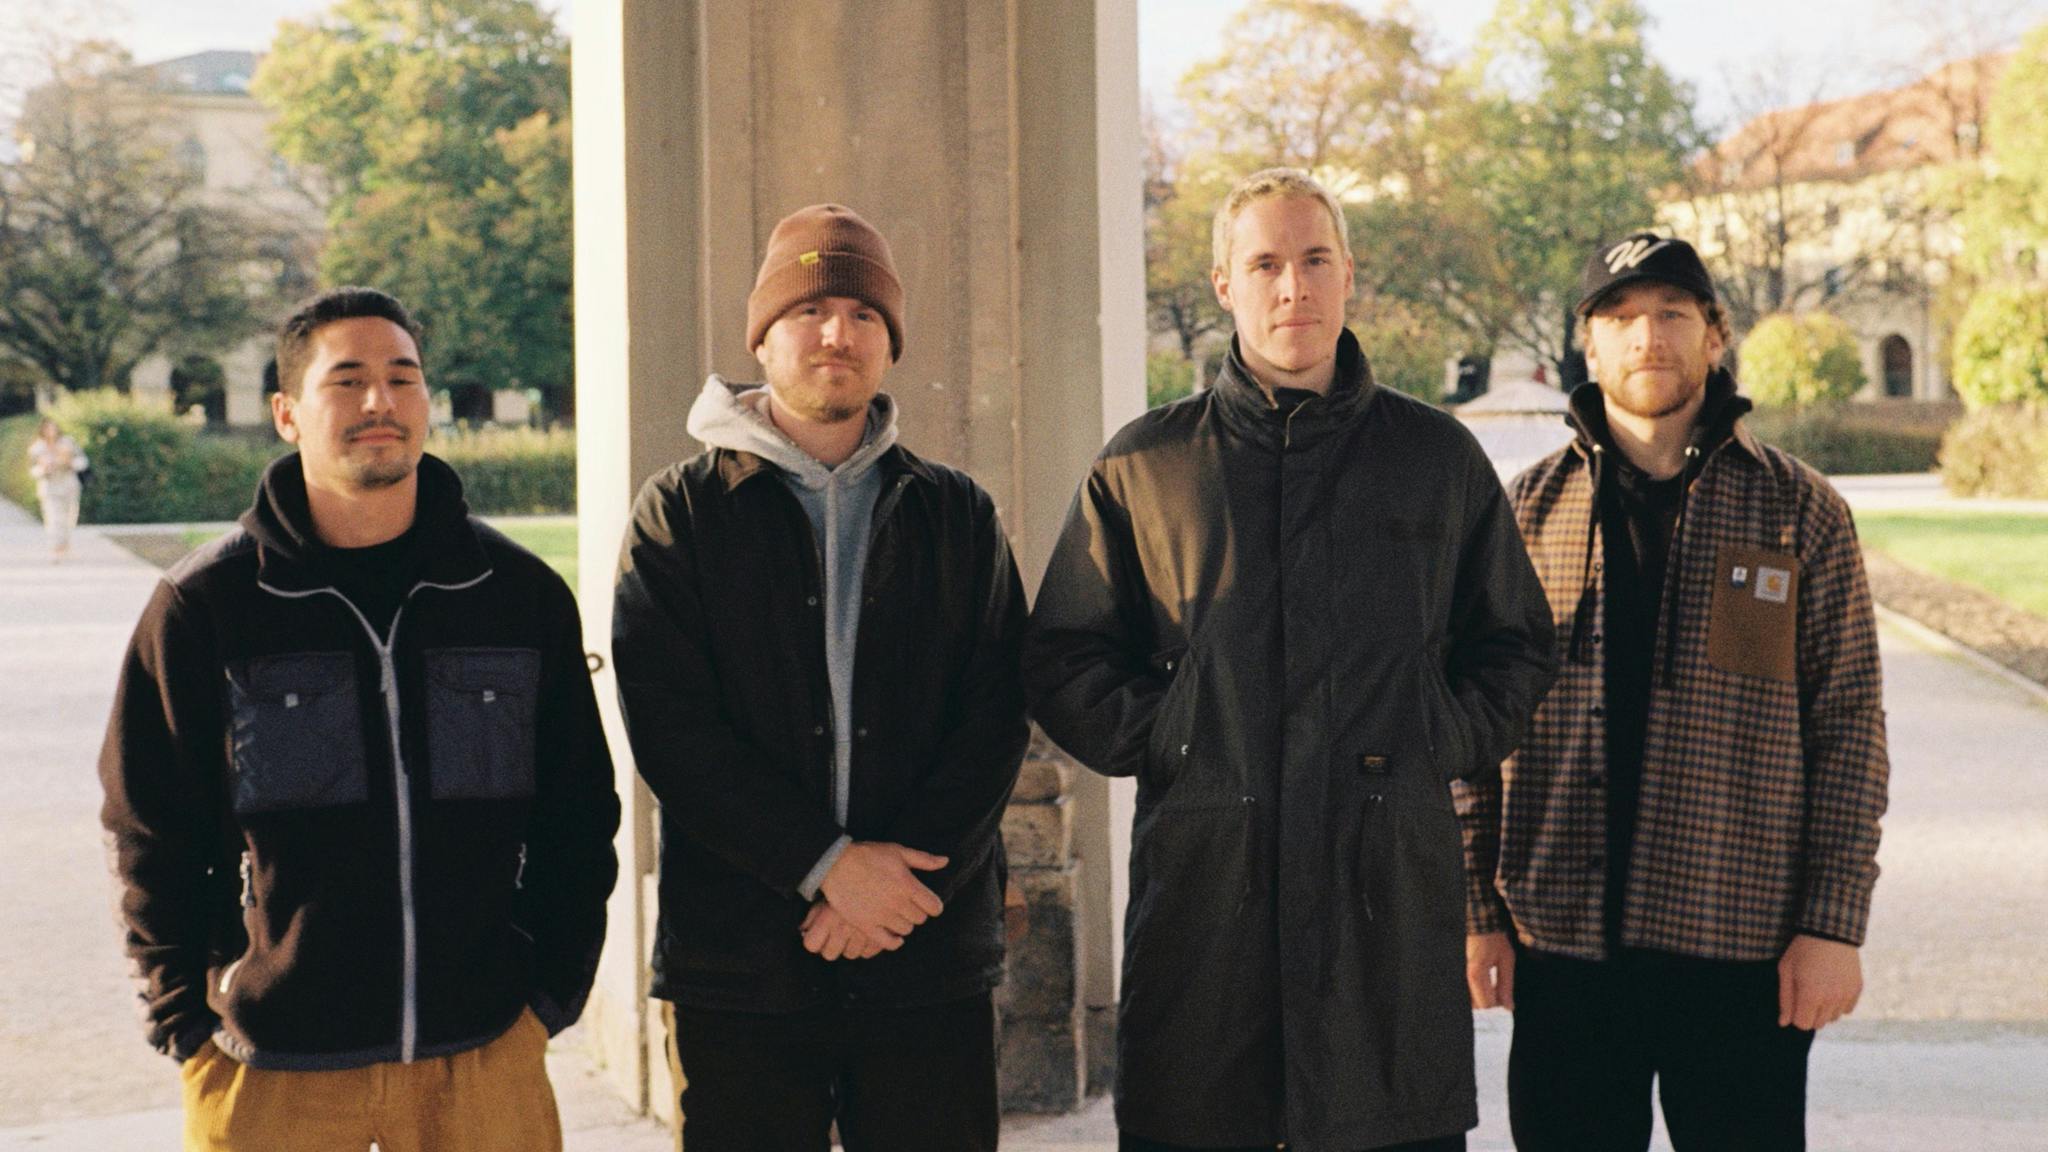 The Story So Far return with Big Blind, their first new music since 2018